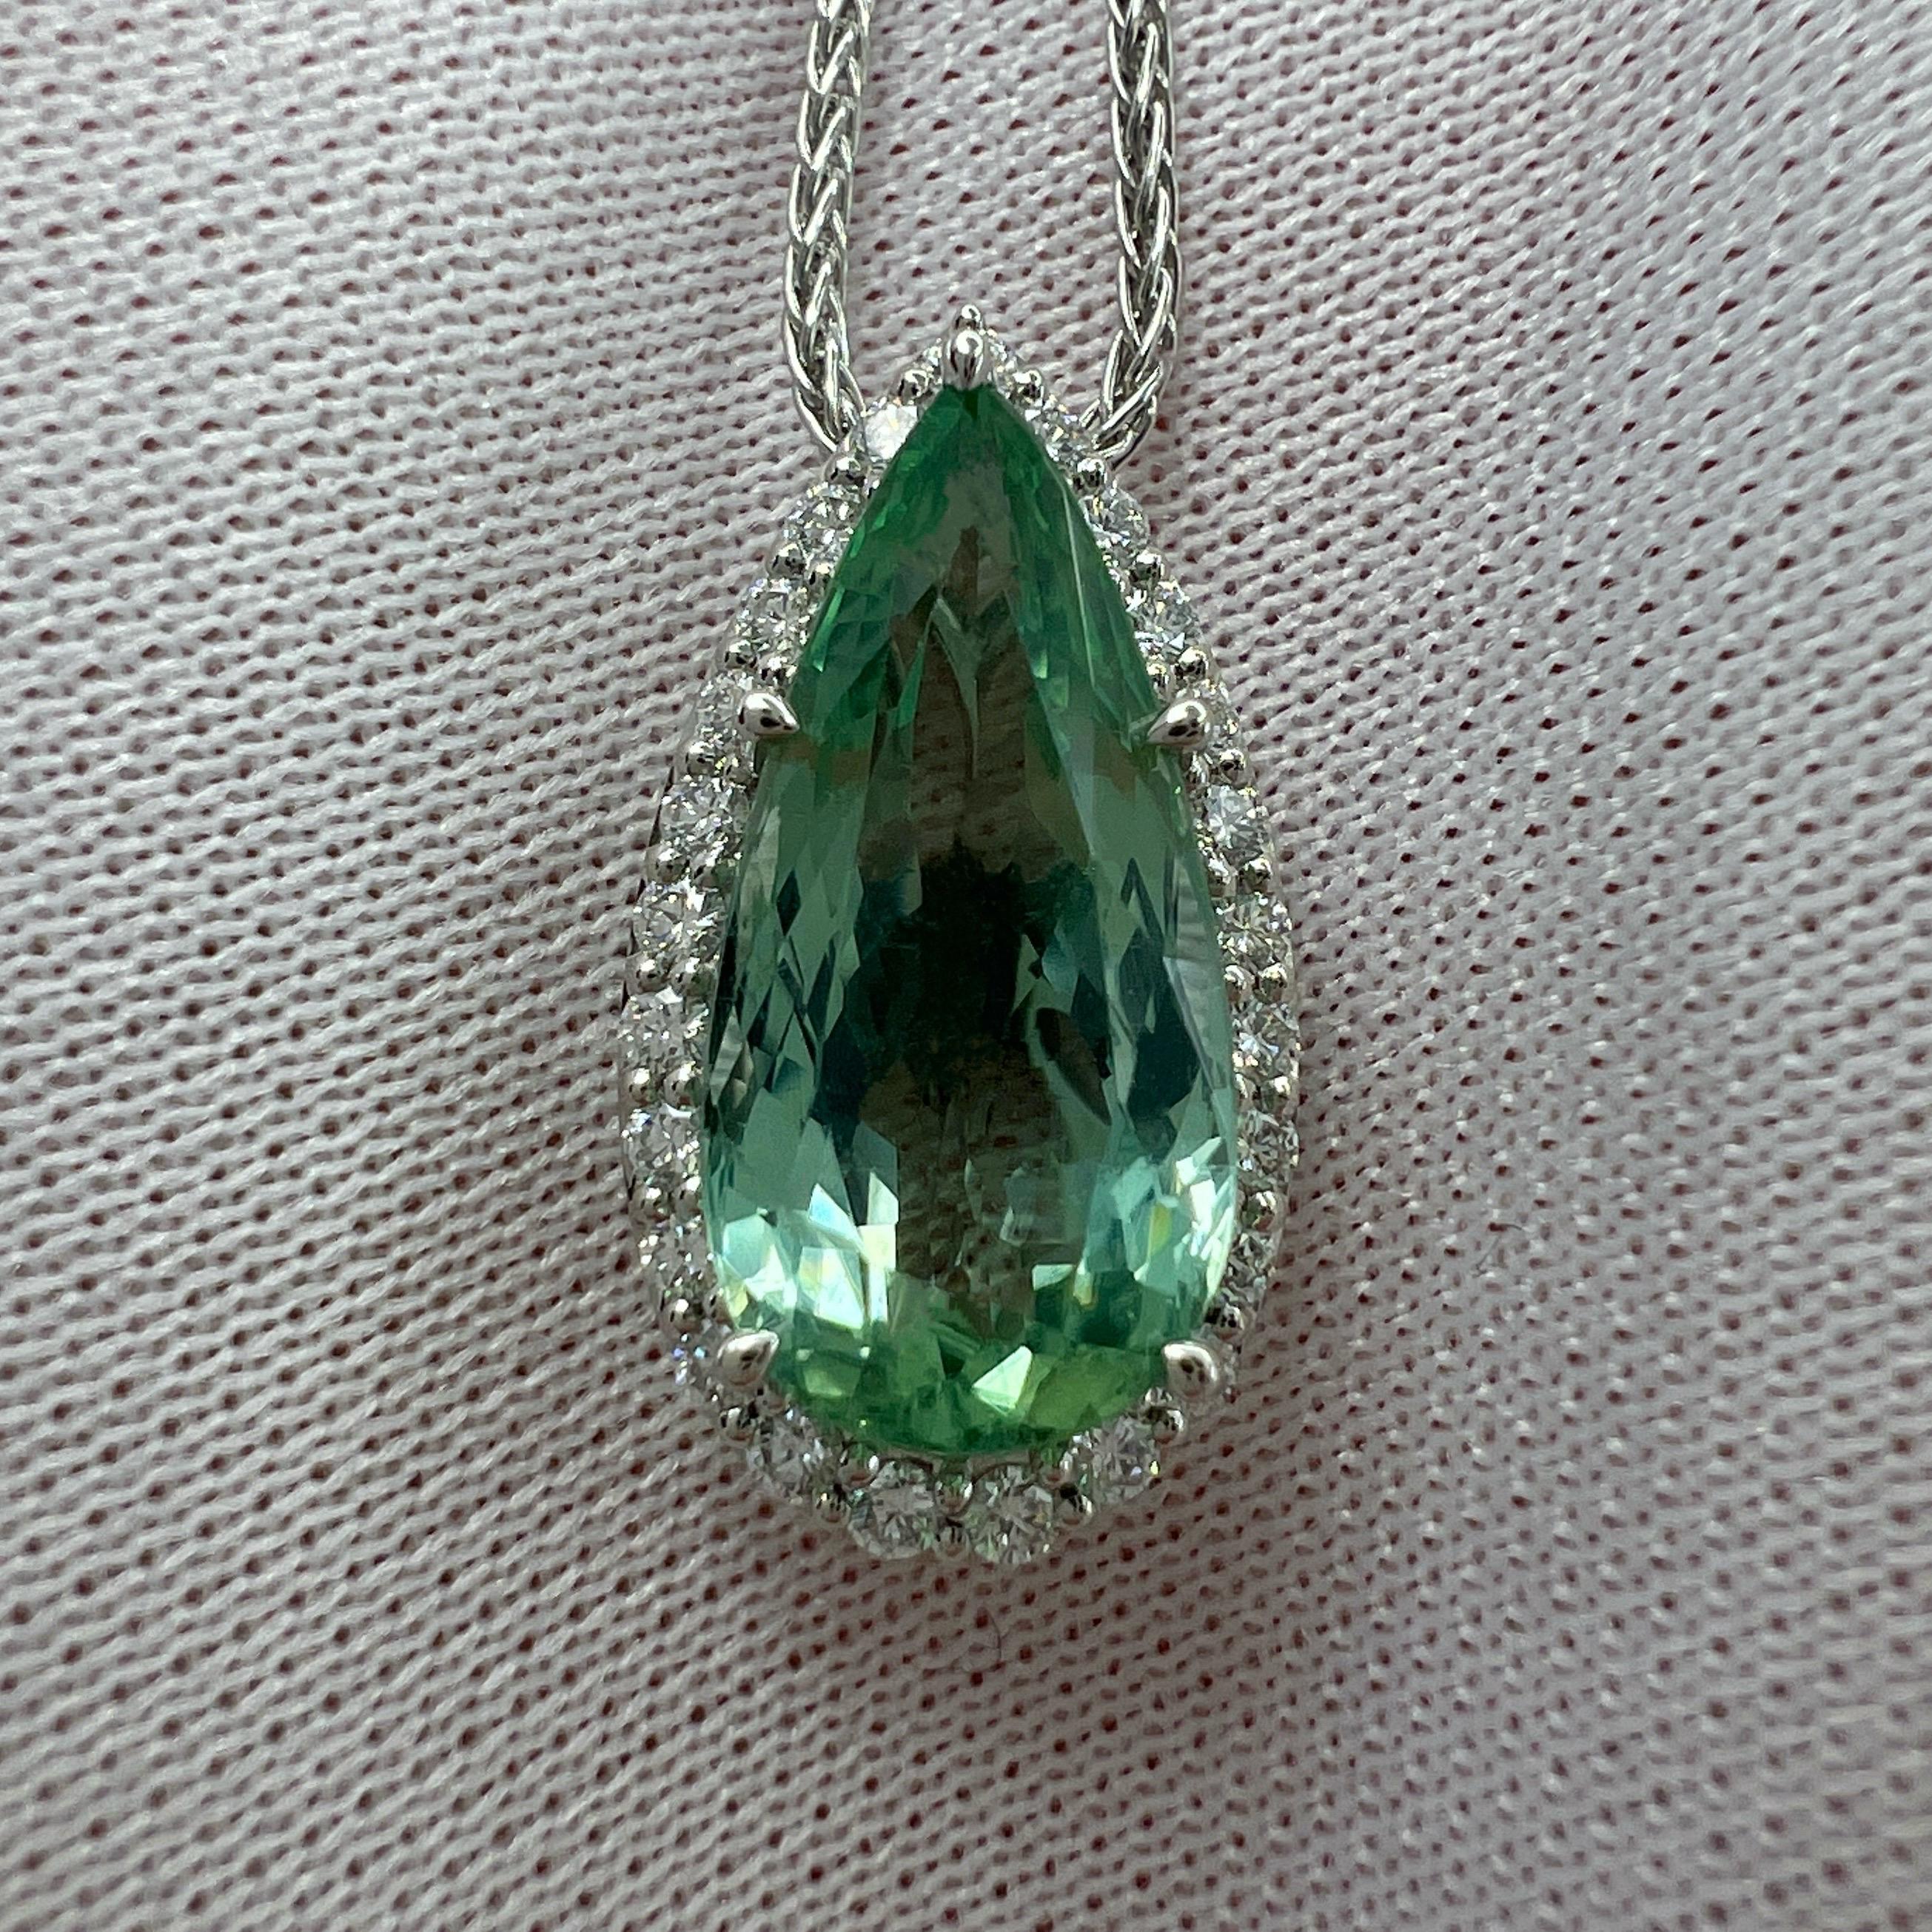 Fine Natural Pear Cut Vivid Green Tourmaline & Diamond Platinum Halo Pendant Necklace.

3.72 Carat tourmaline with a stunning vivid 'mint' green colour and excellent clarity, very clean stone. 
Also has an excellent pear teardrop cut showing lots of